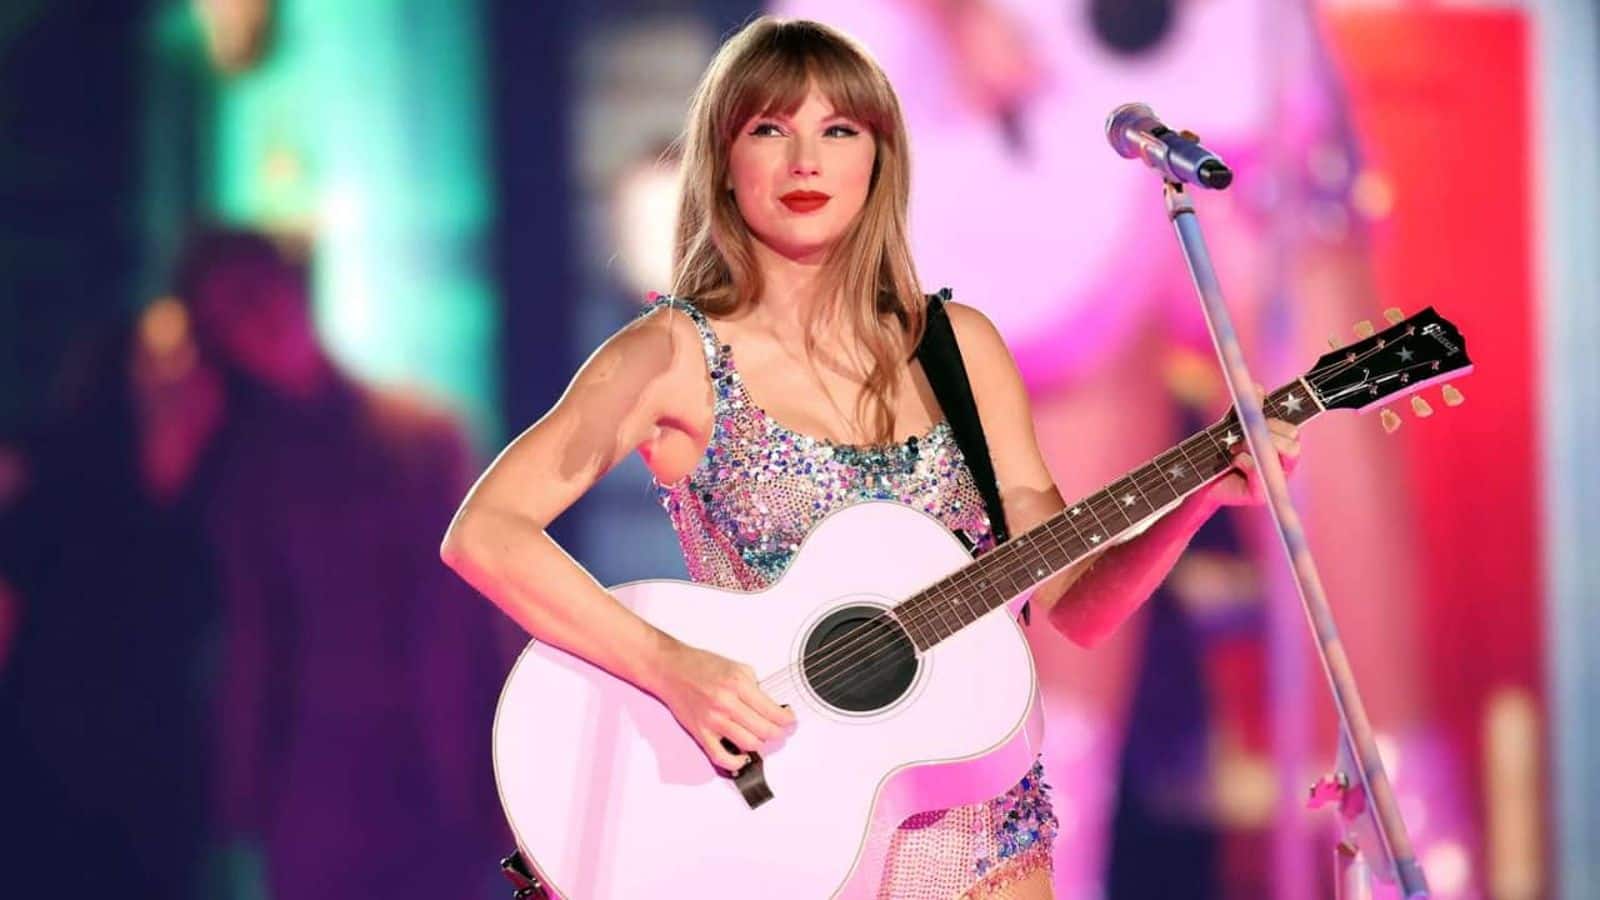 Taylor Swift stops mid-song to assist fan during 'Eras Tour'